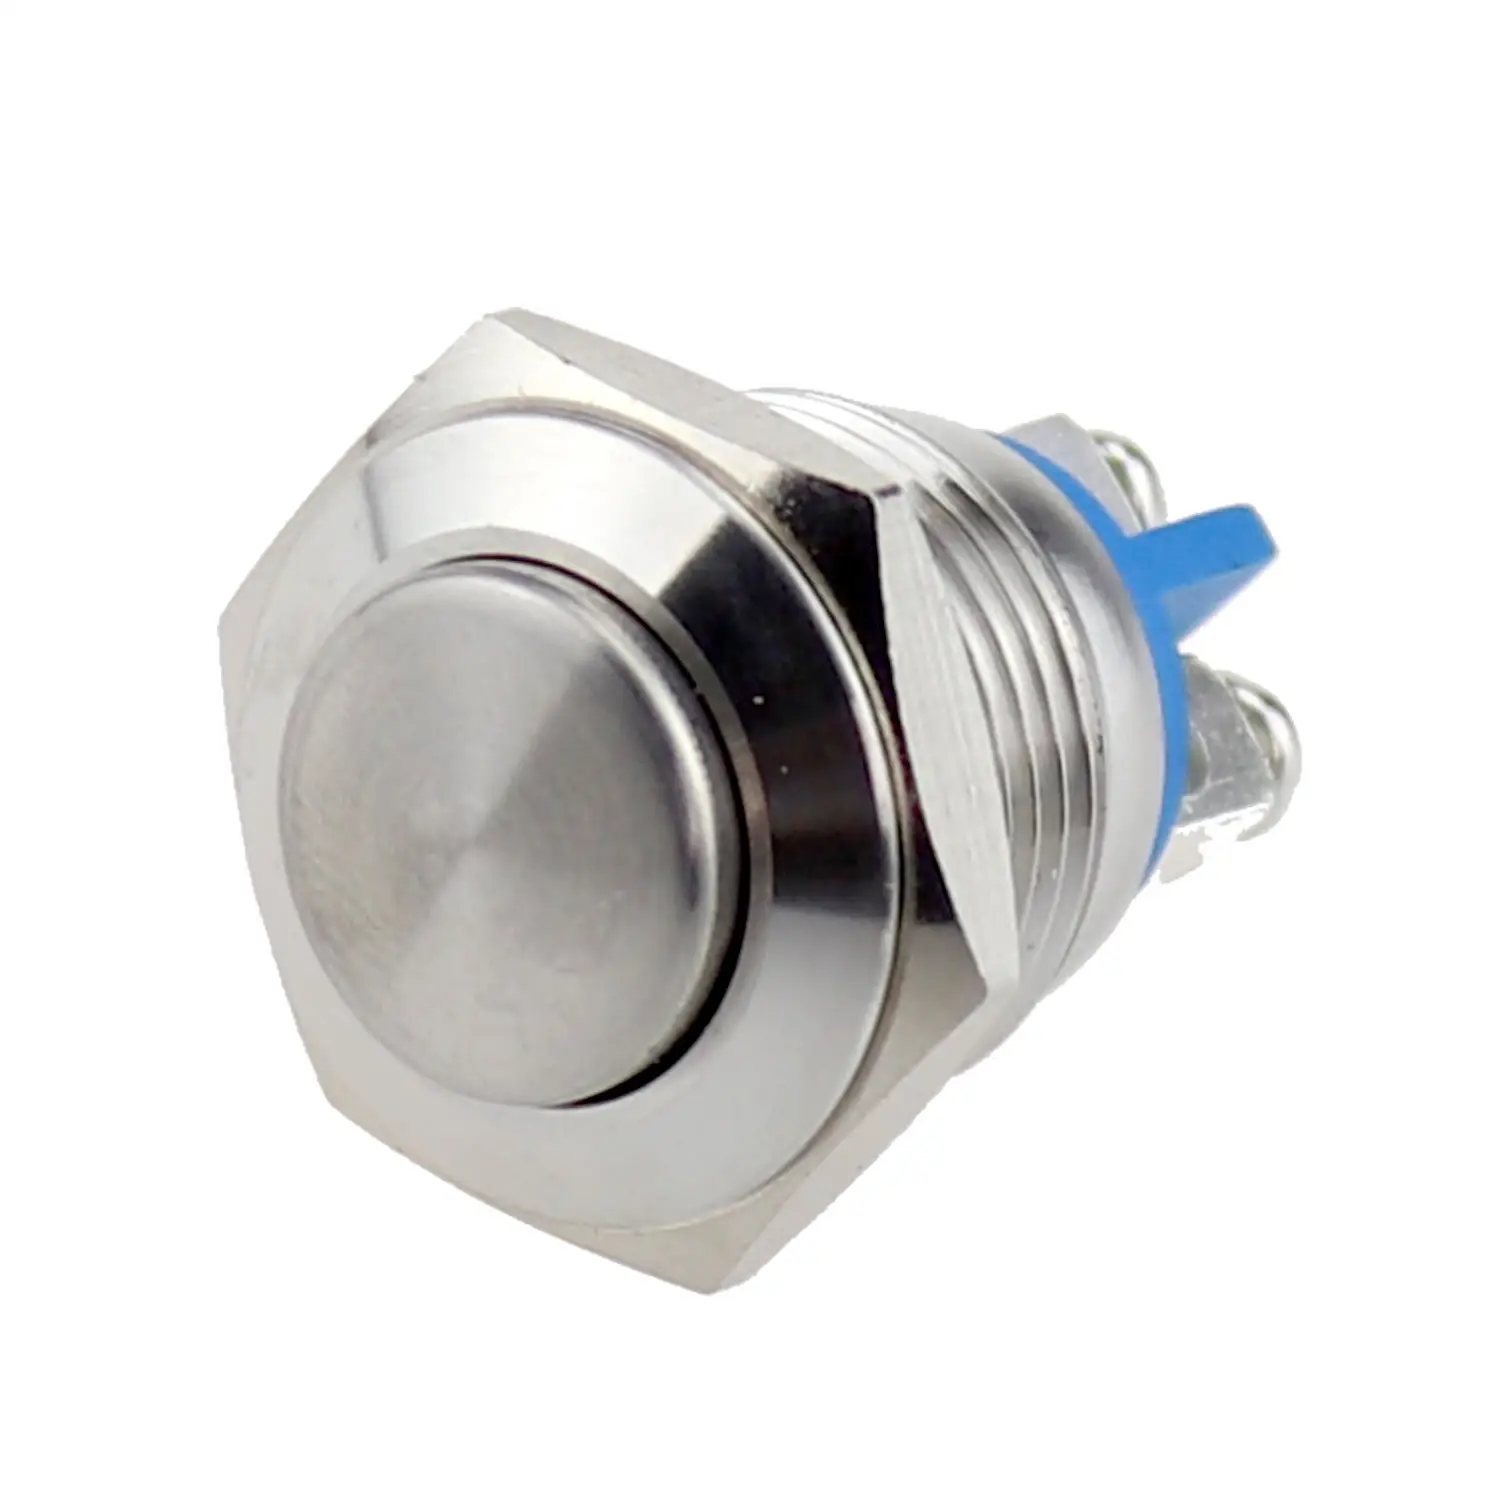 16mm high round head momentary Stainless Steel 2 Screw Terminals waterproof Metal Push Button Switch